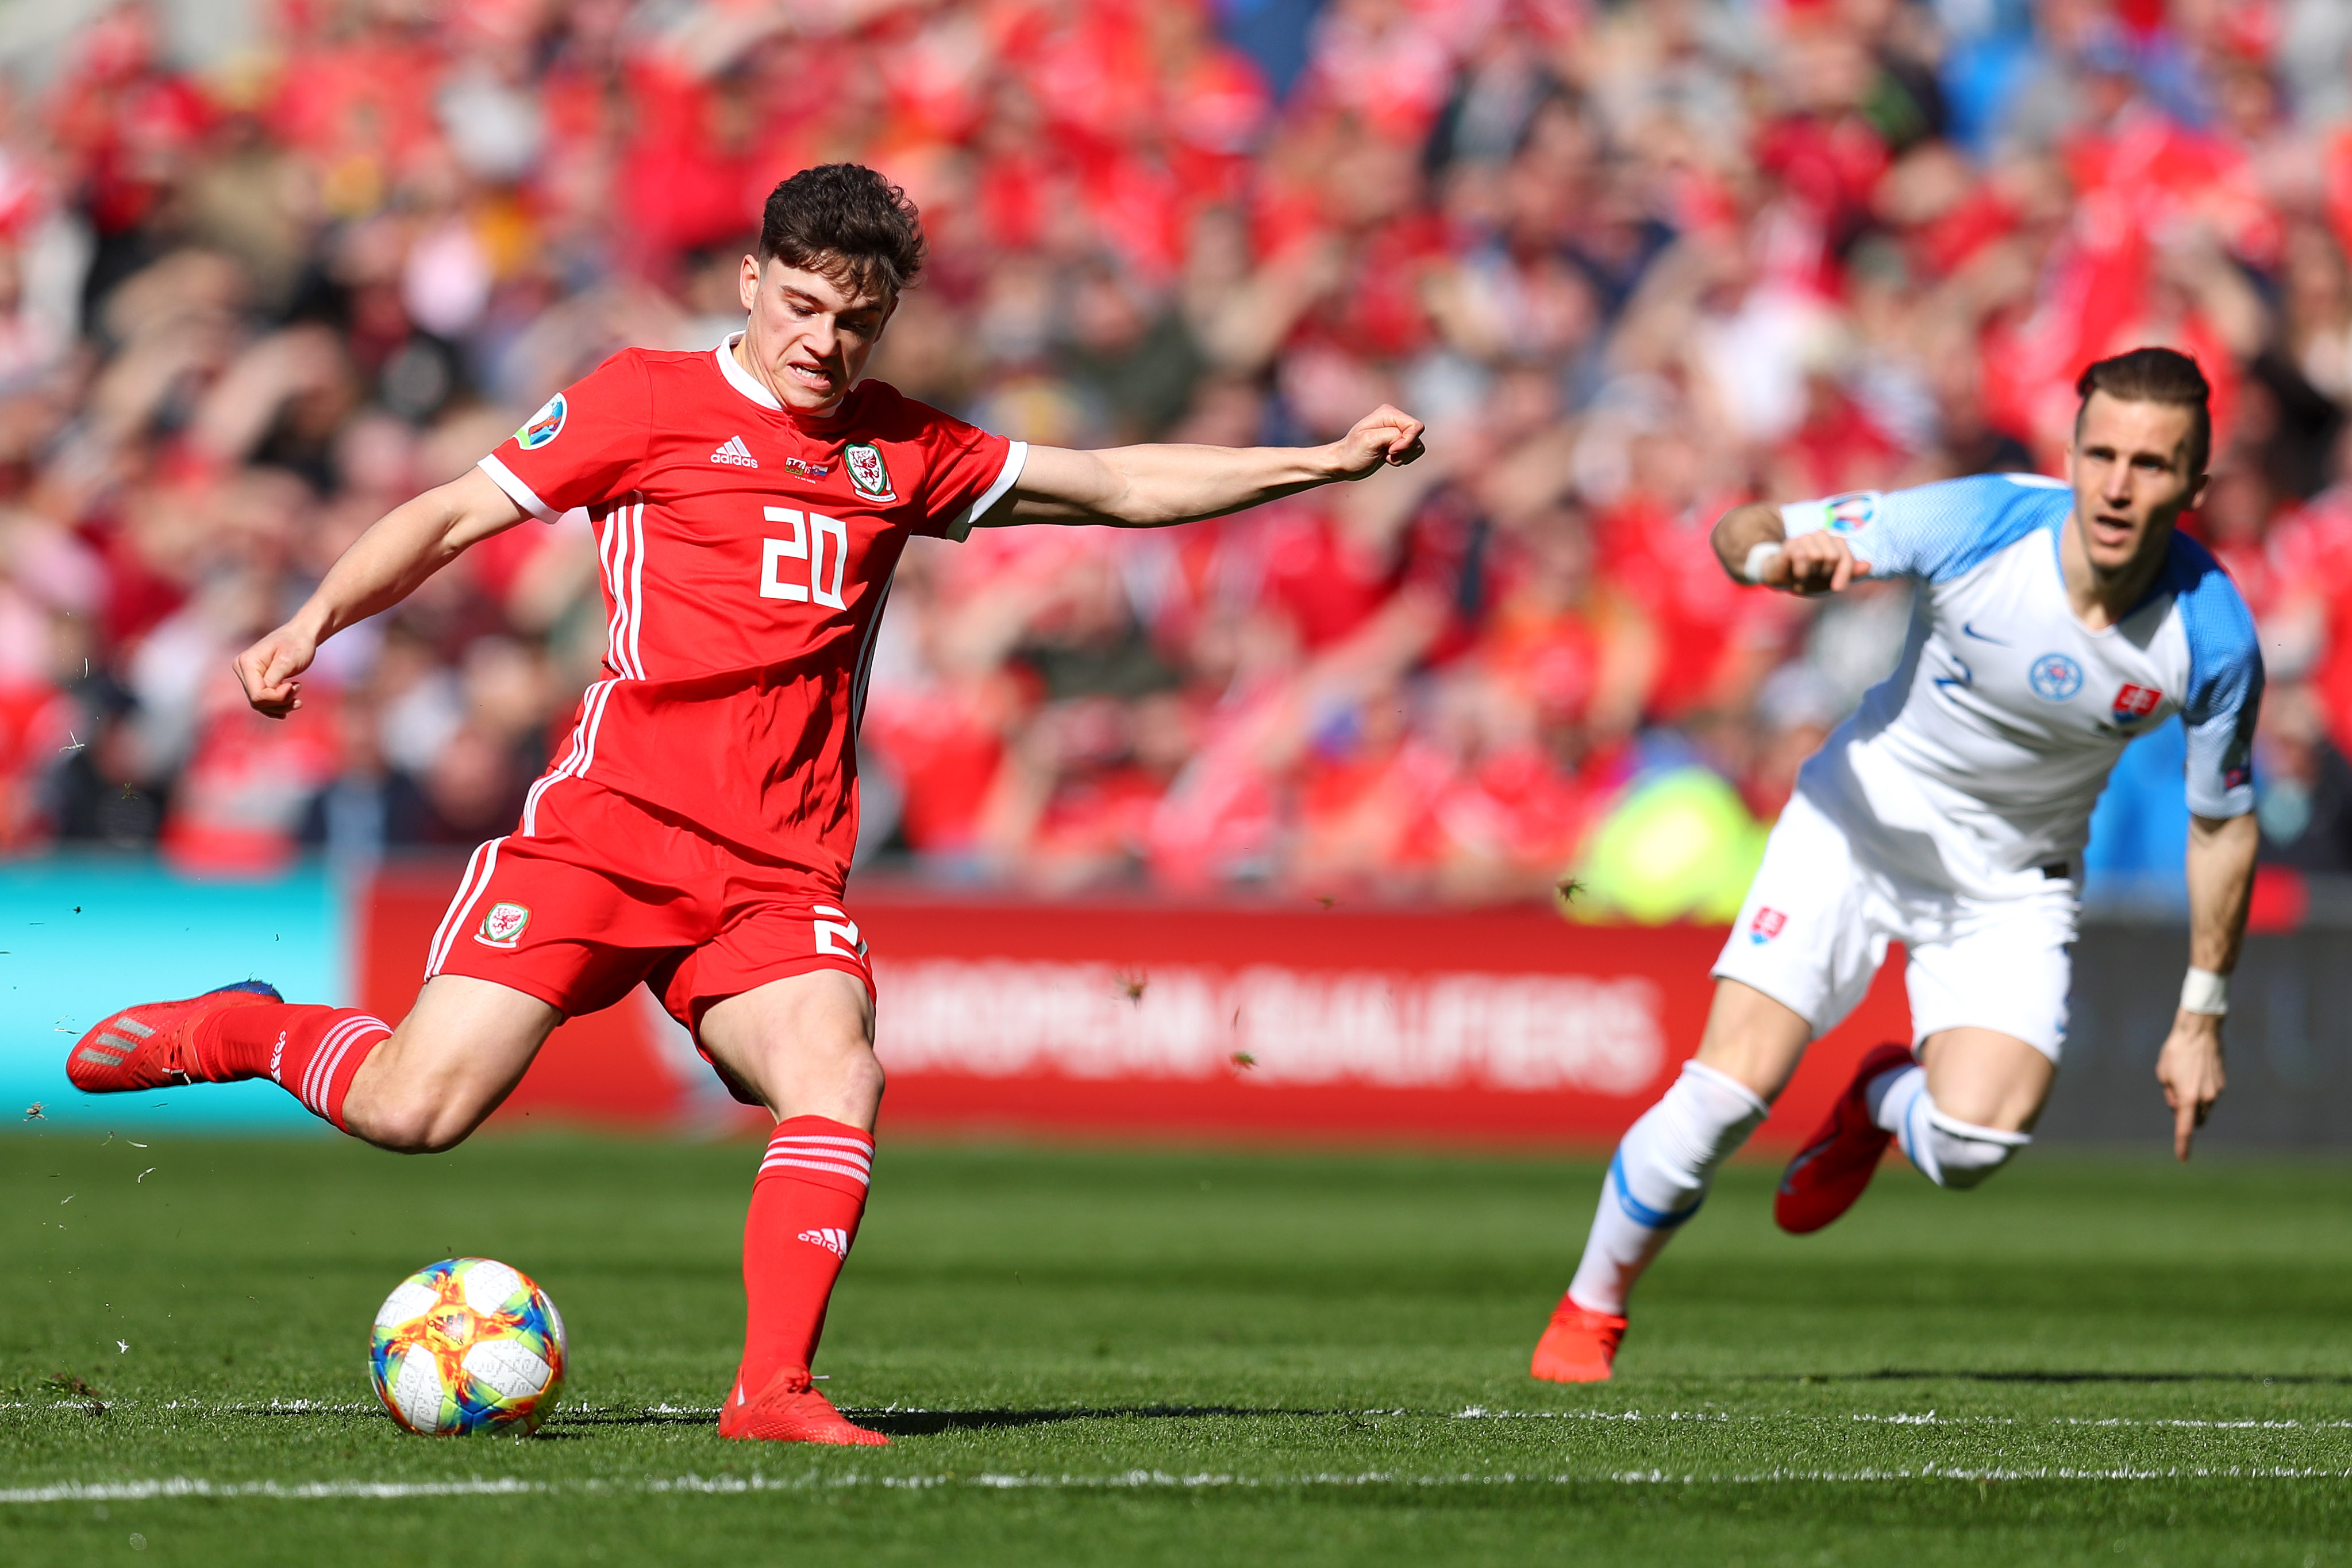 Daniel James is set to don red at club level as well, with a move to Manchester United close to being sealed. (Picture Courtesy - AFP/Getty Images)